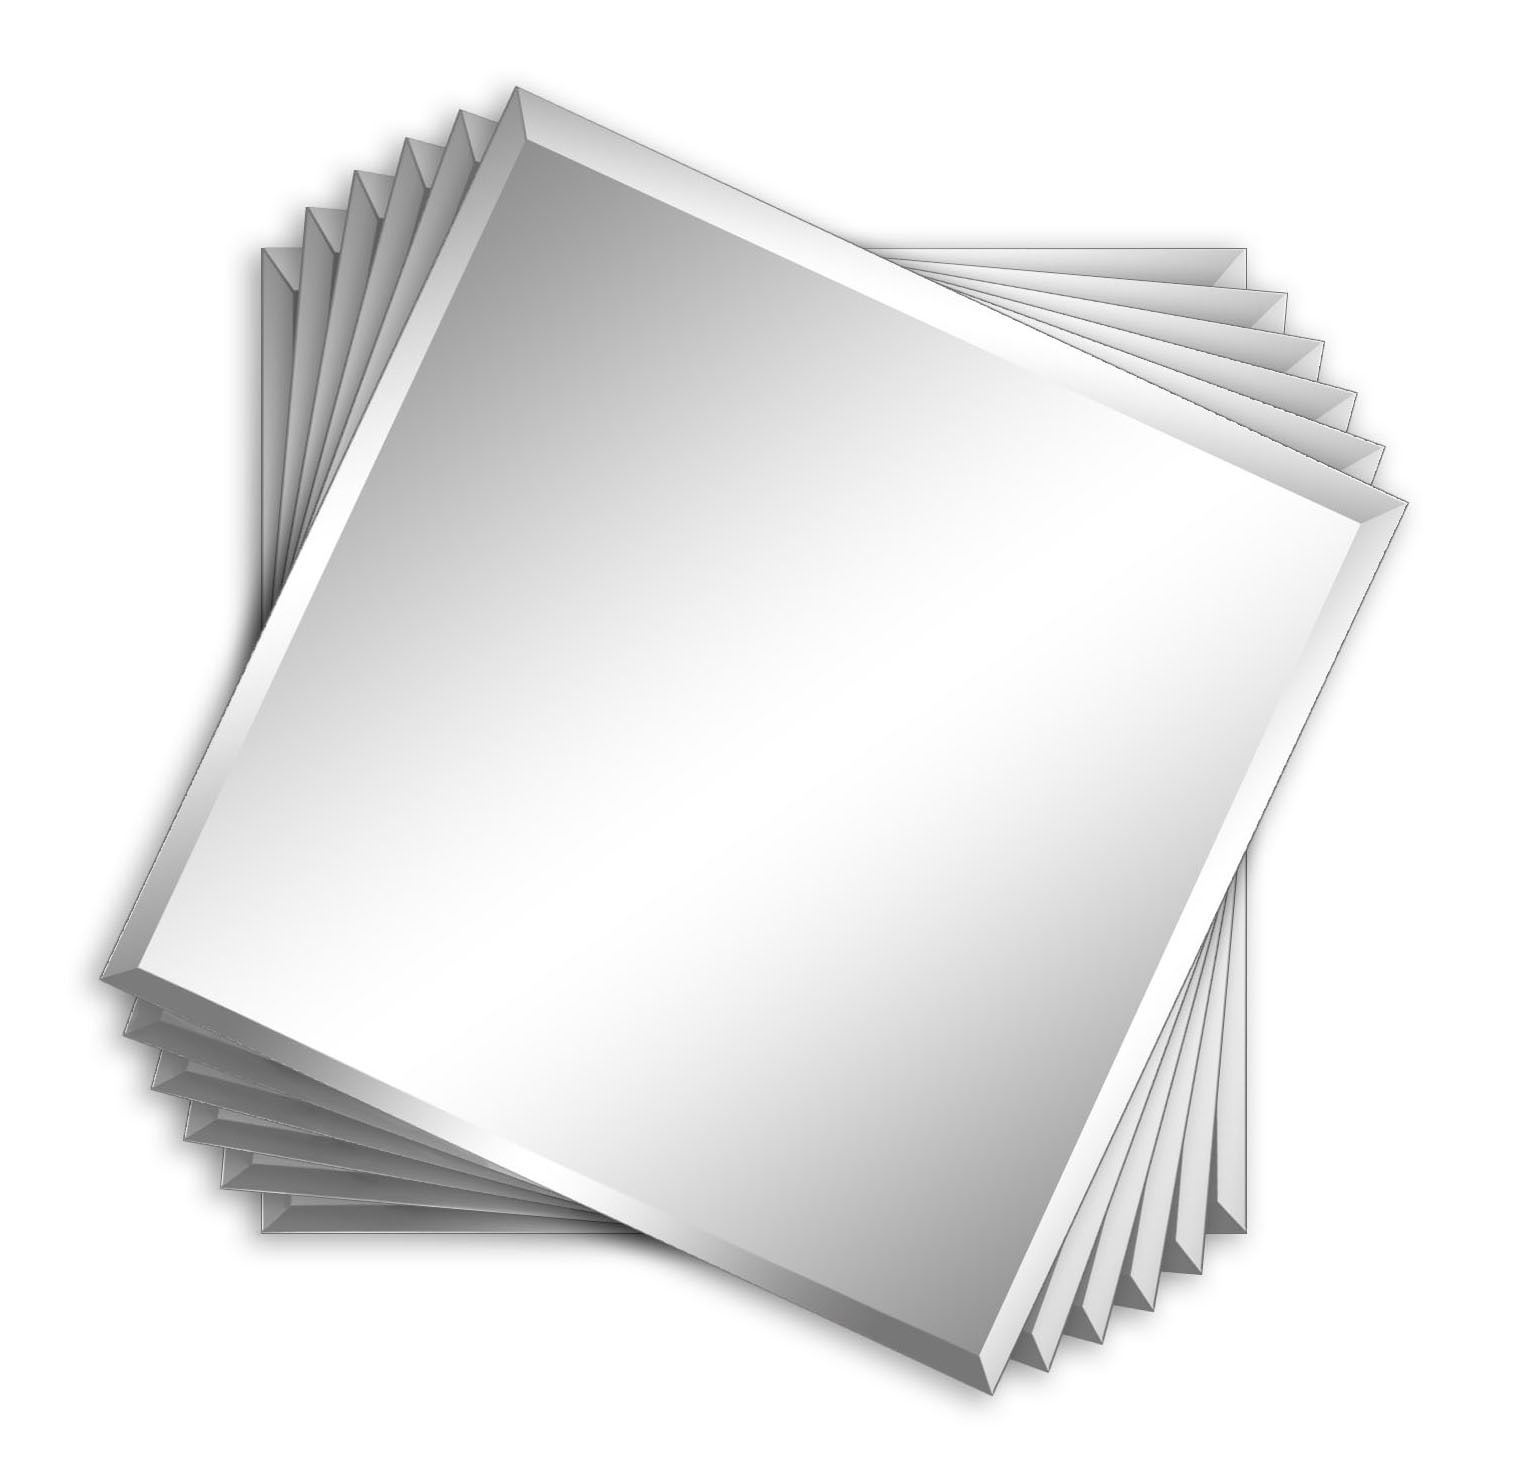 Square Beveled Wall Mirror, Square Beveled Mirror Tiles